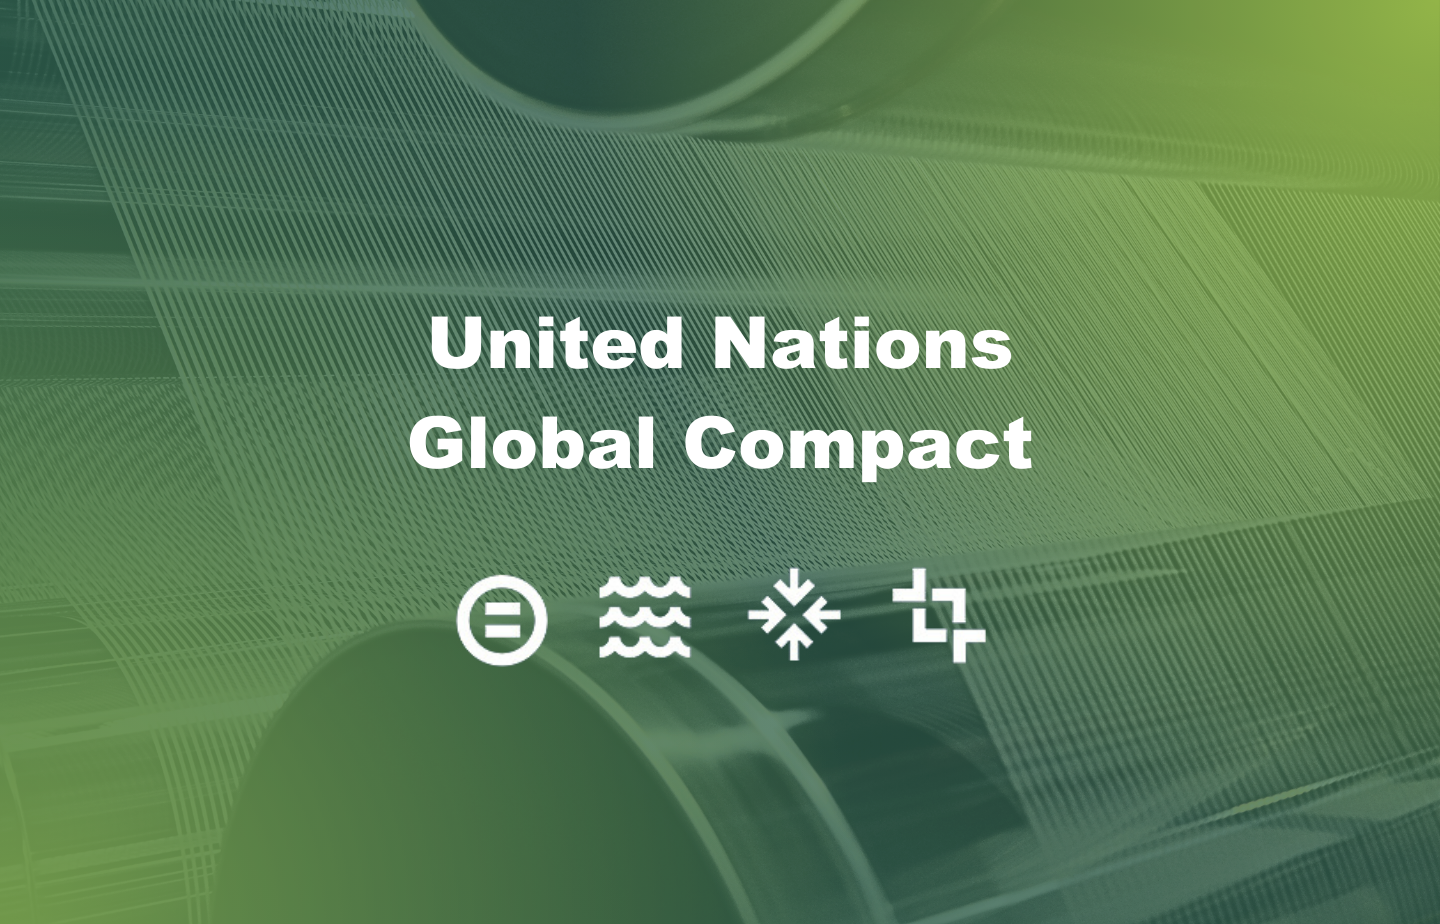 FPS has embedded the Ten Principles of the United Nations Global Compact